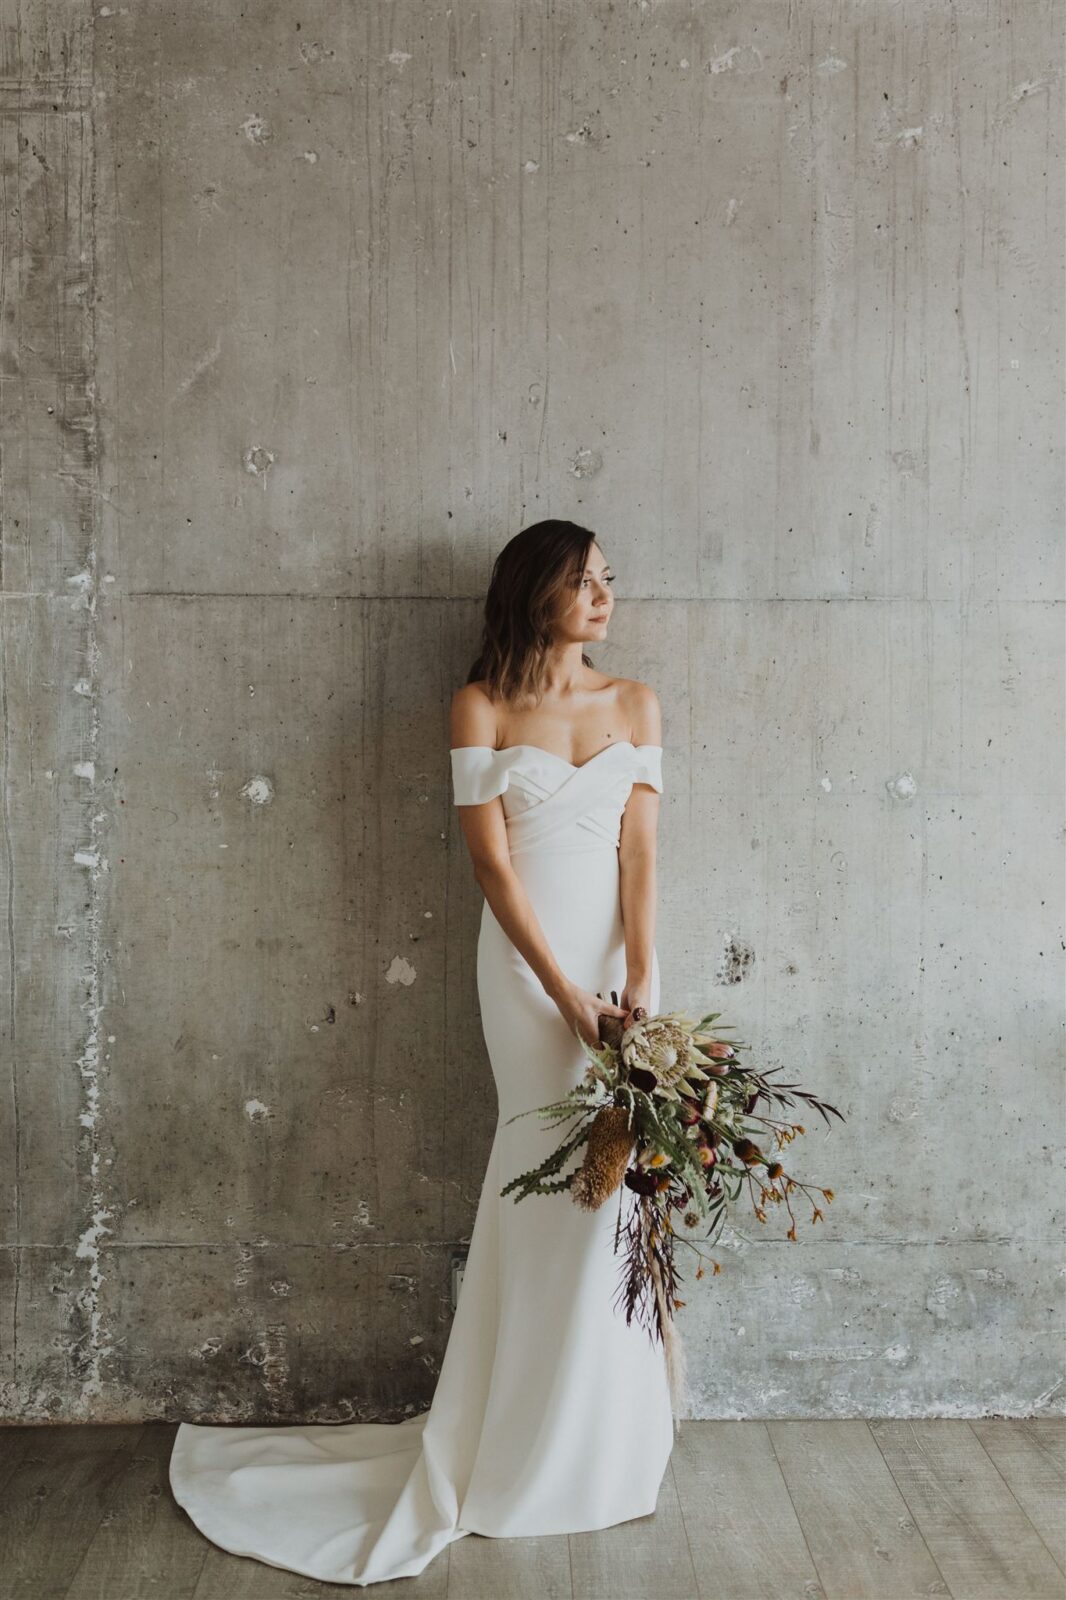 Bride in white dress posing against the grey wall while holding boutique